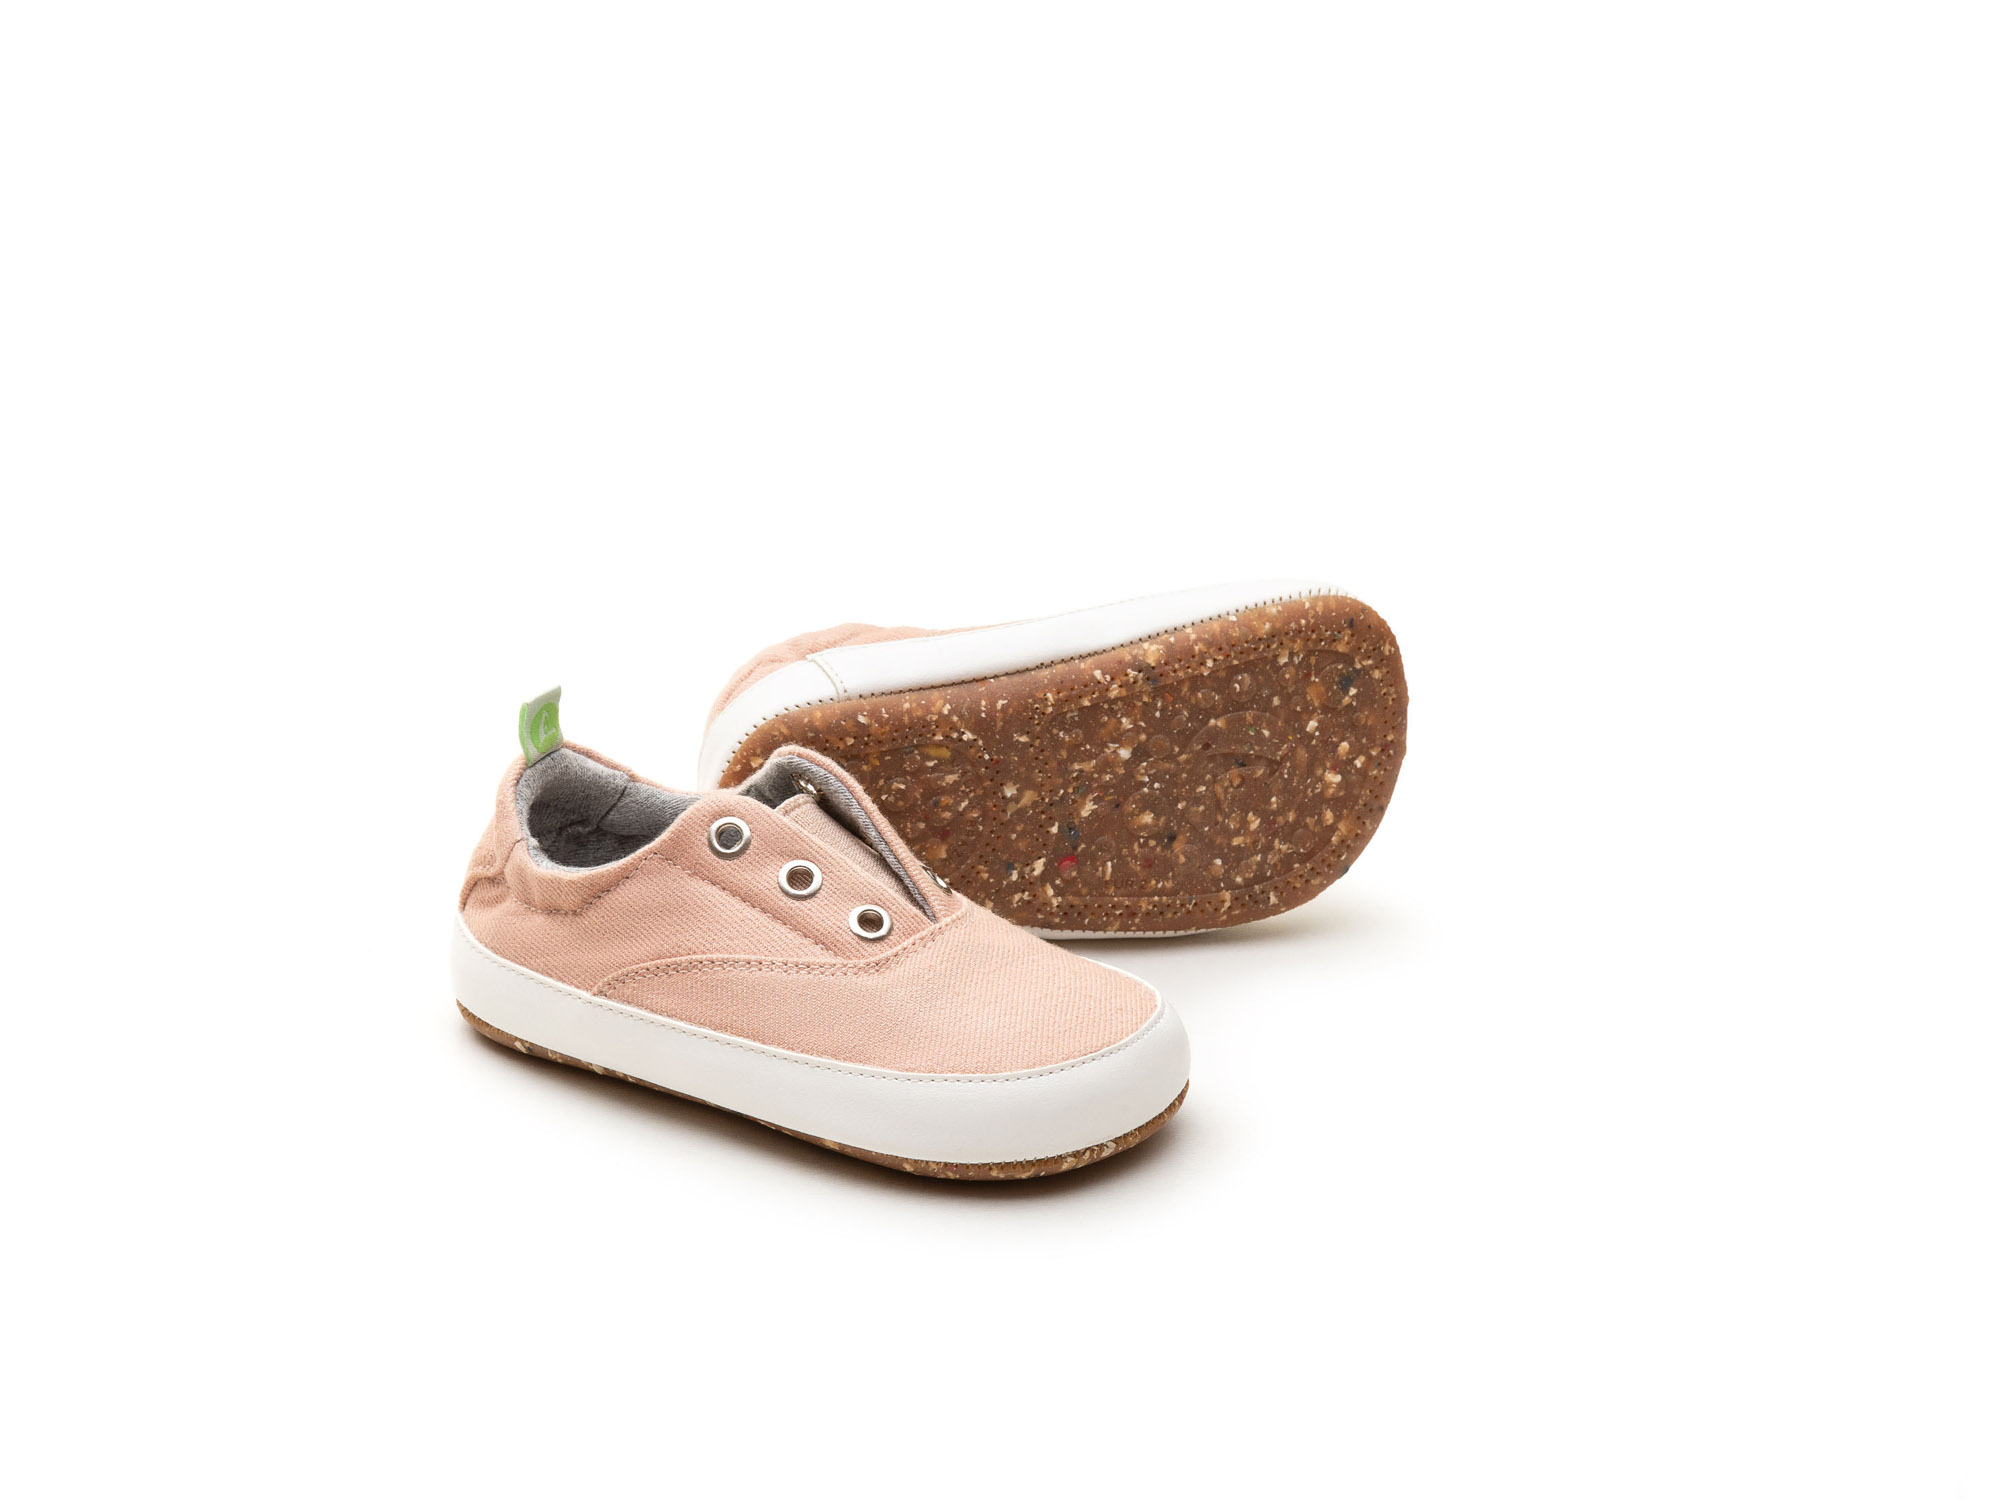 UP & GO Sneakers for Girls Spicey Green | Tip Toey Joey - Australia - 0